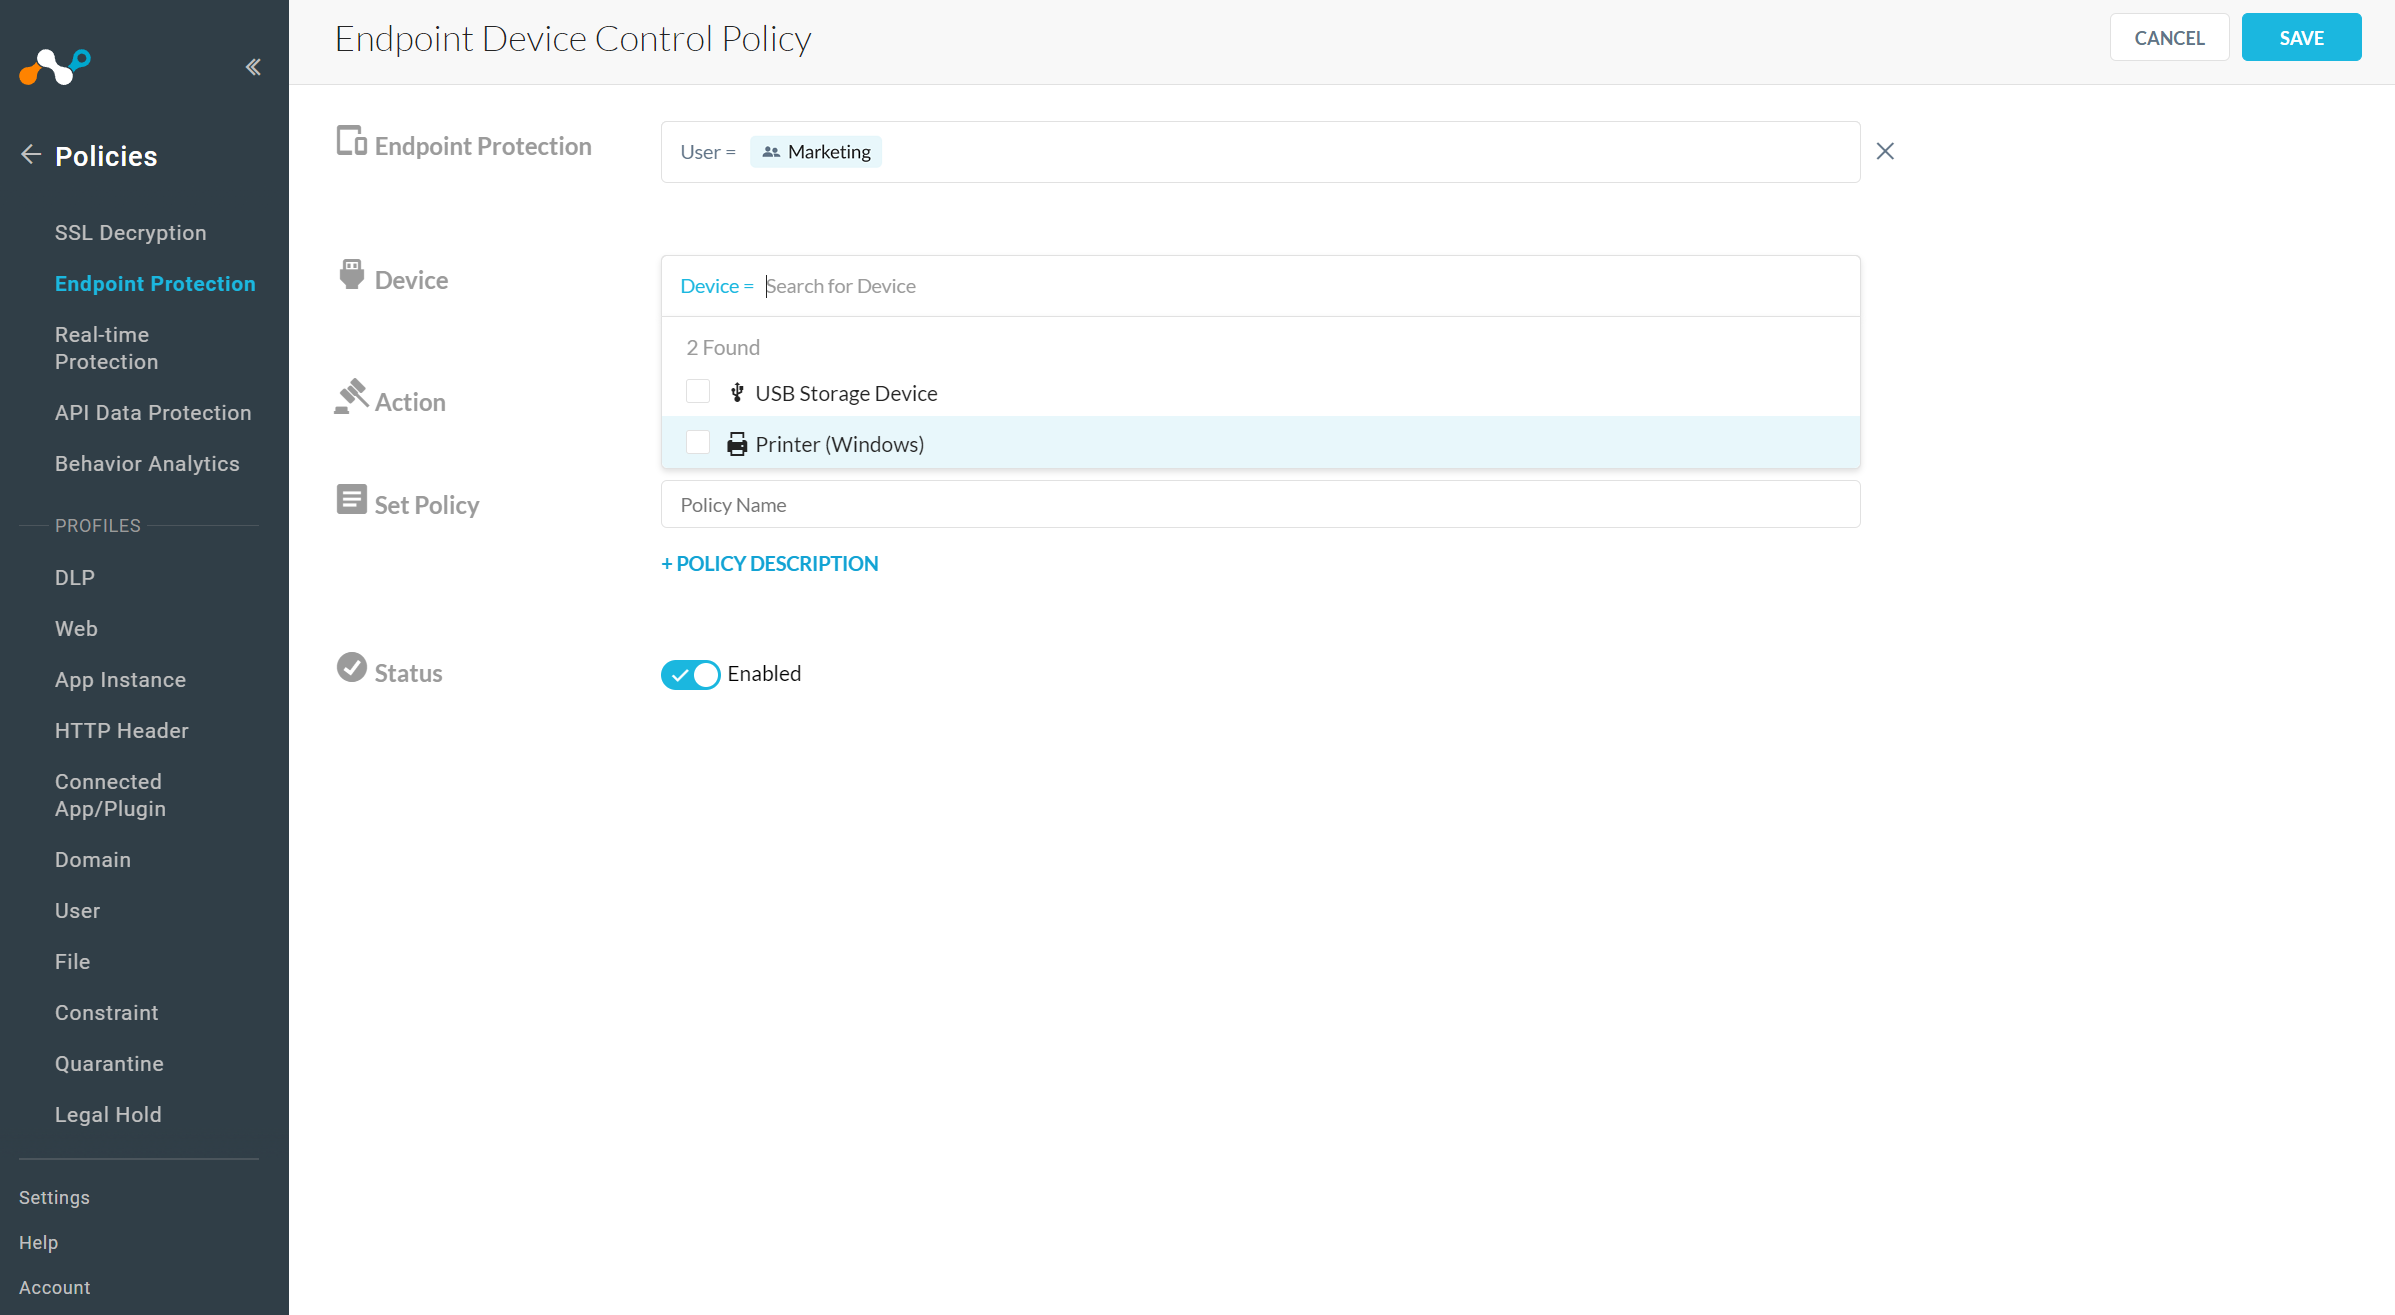 The configured Endpoint Device Control Policy page. R105